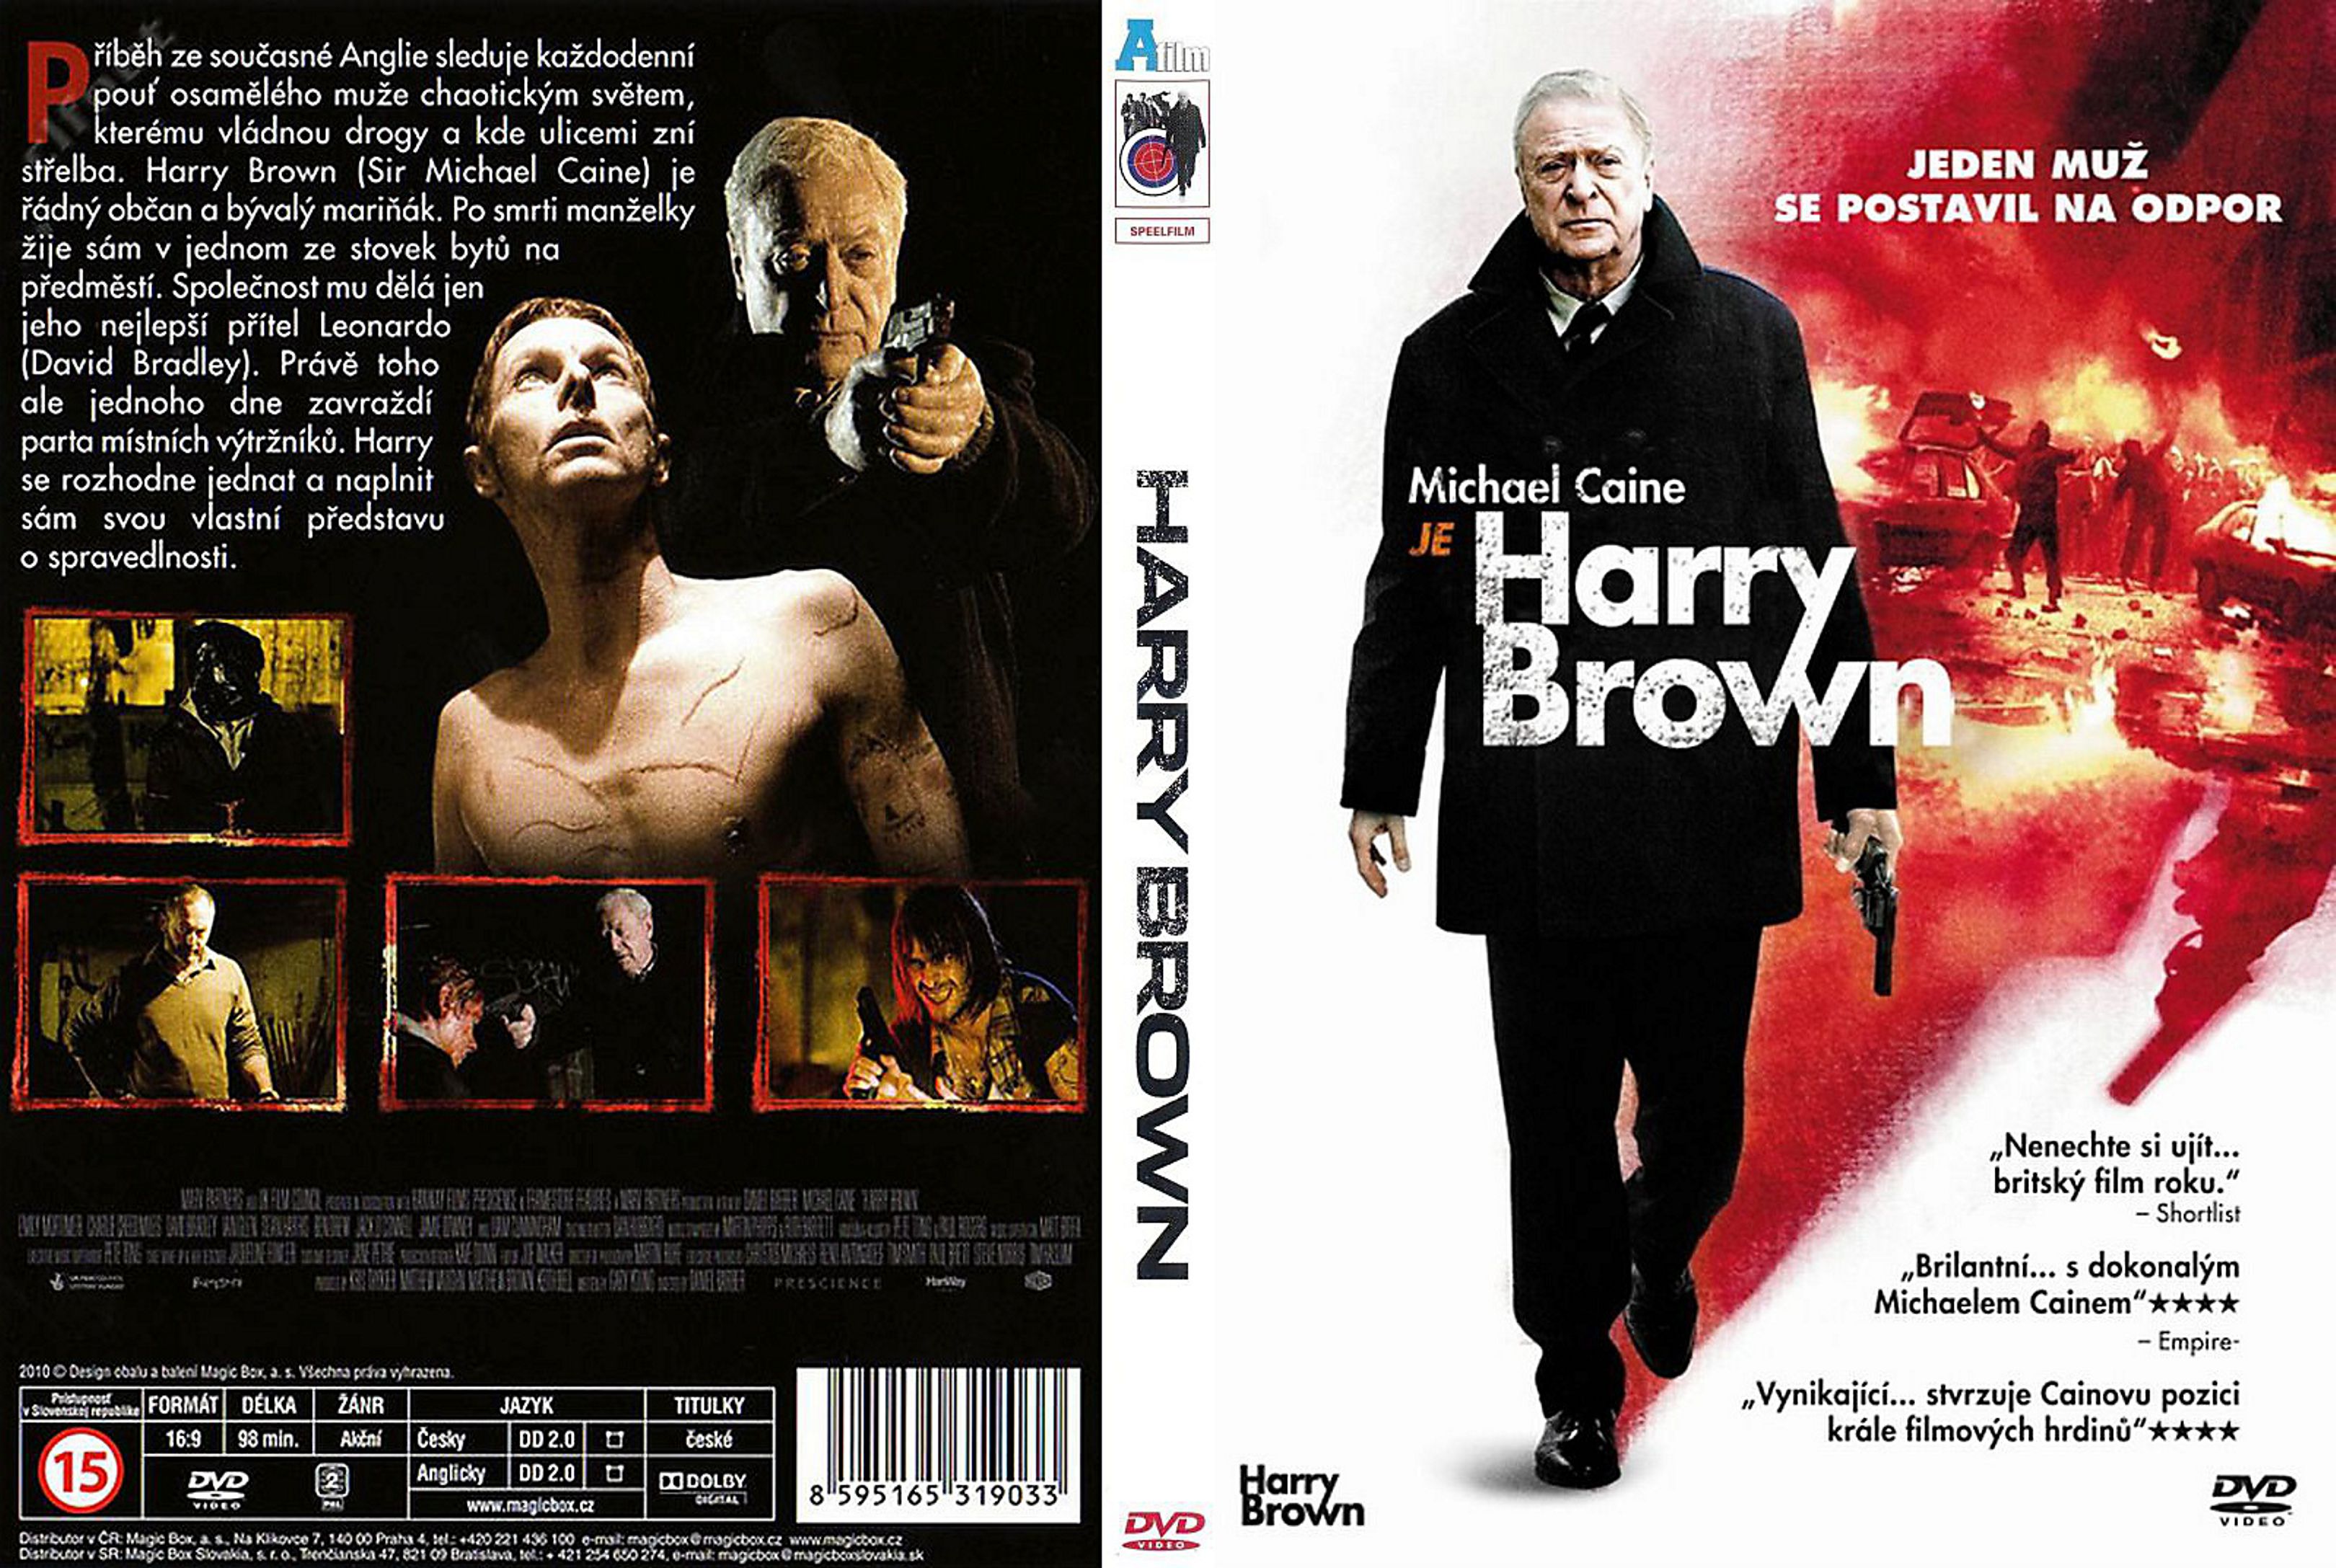 Download Harry Brown 2009 Full Hd Quality